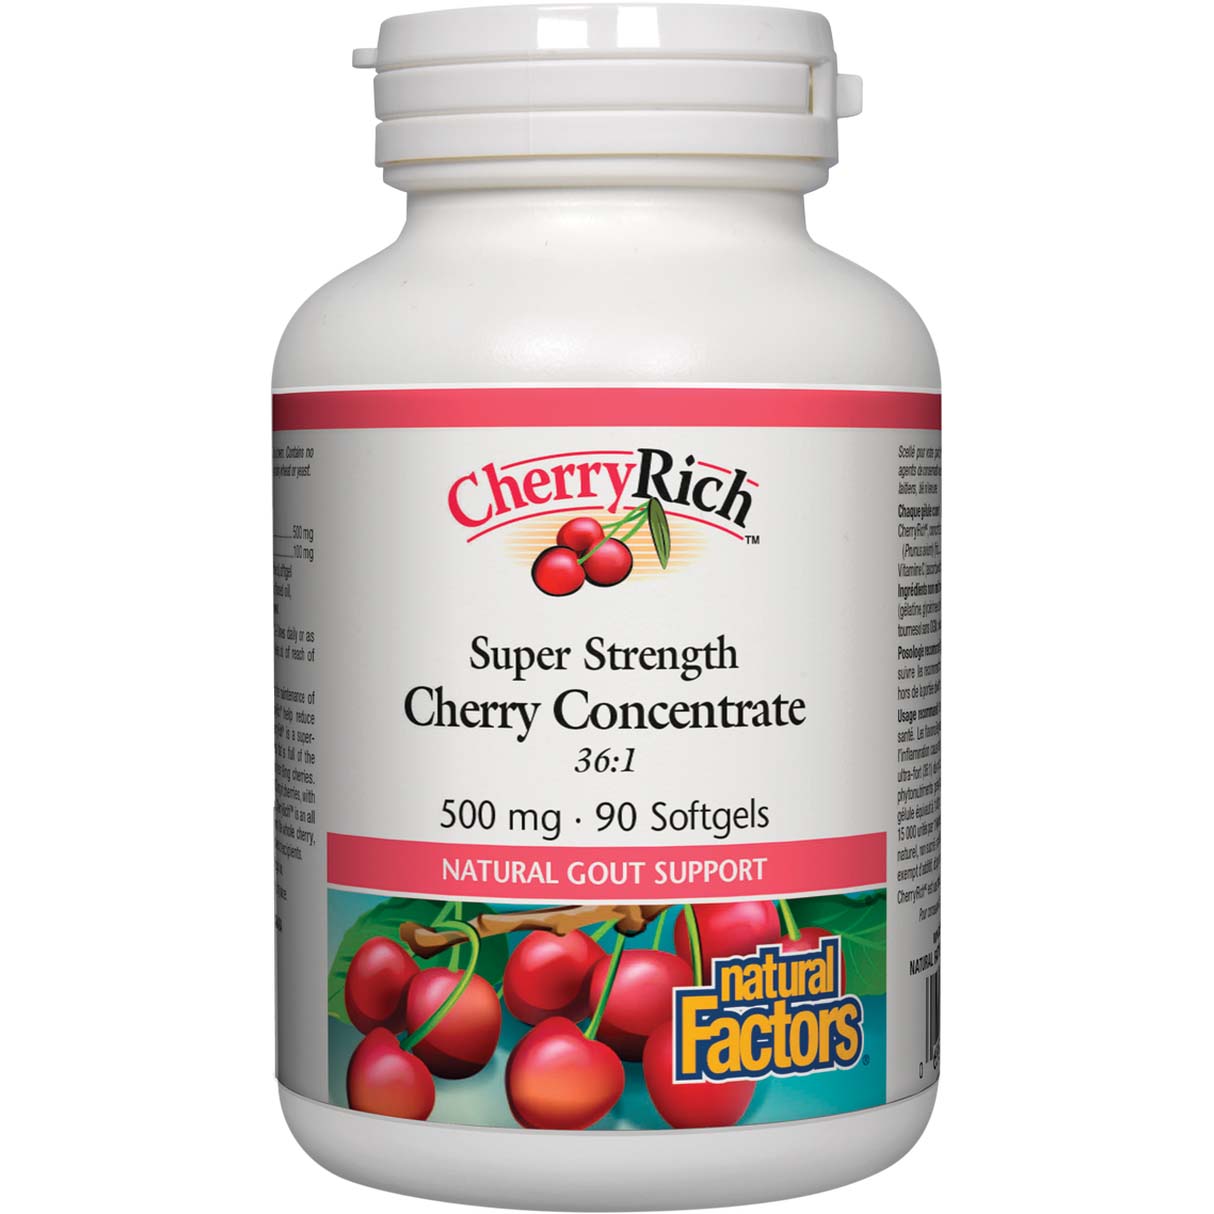 Natural Factors Super Strength Cherry Concentrate, 500 mg, 90 Softgels